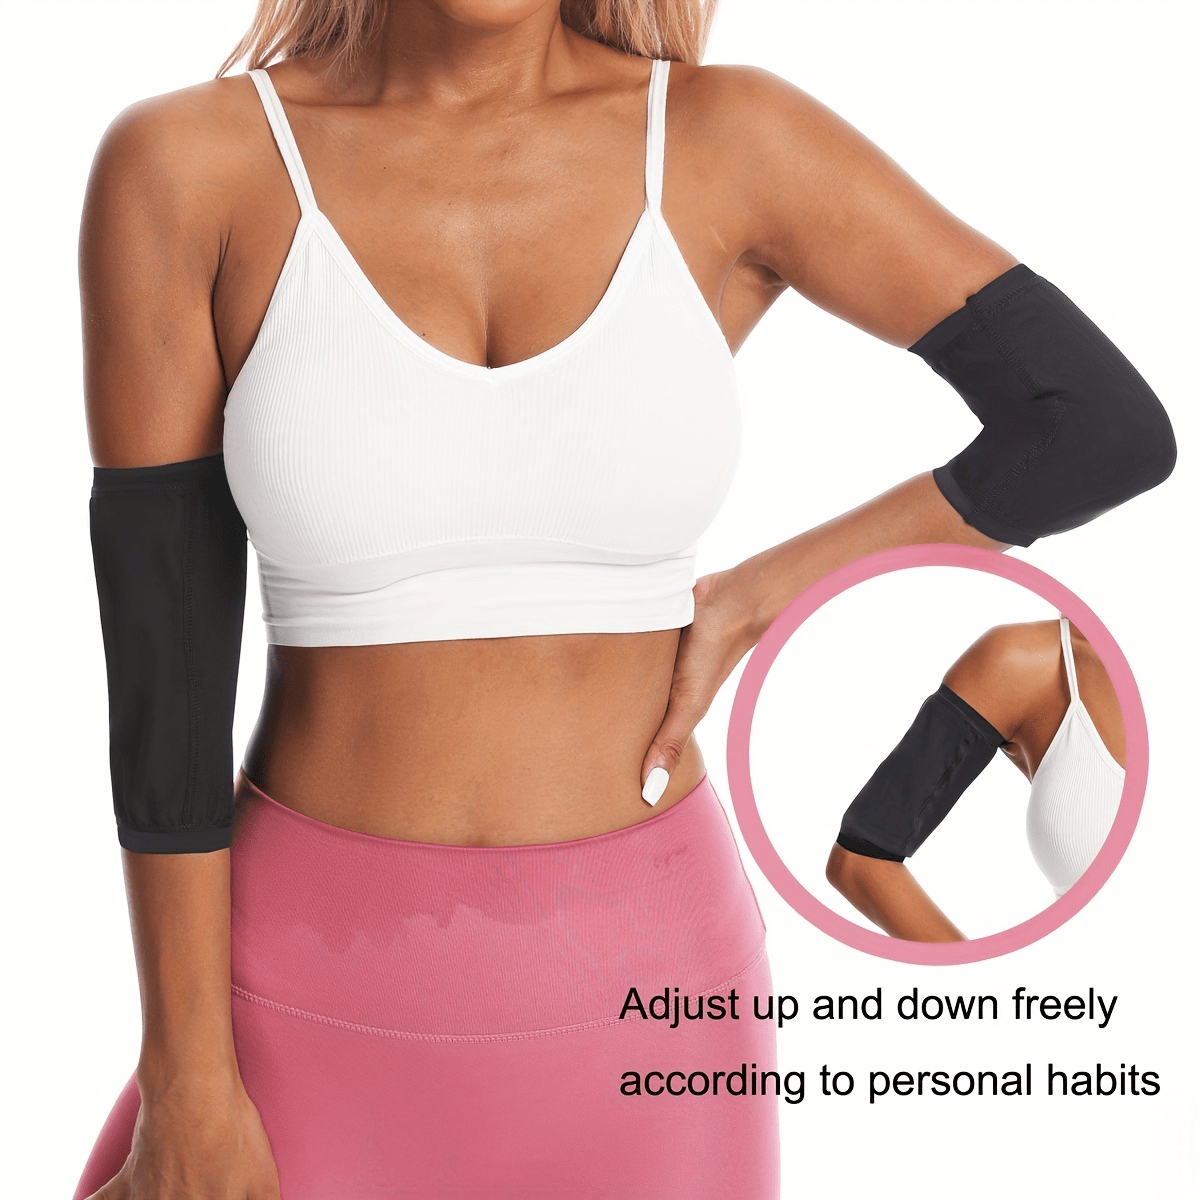 SUPERHOMUSE Armbands Body Shapers Neoprene Sauna Arm Warmers Slimmer Sleeve  Trimmers Wraps For Lose Fat Arm Shaper Weight Loss 